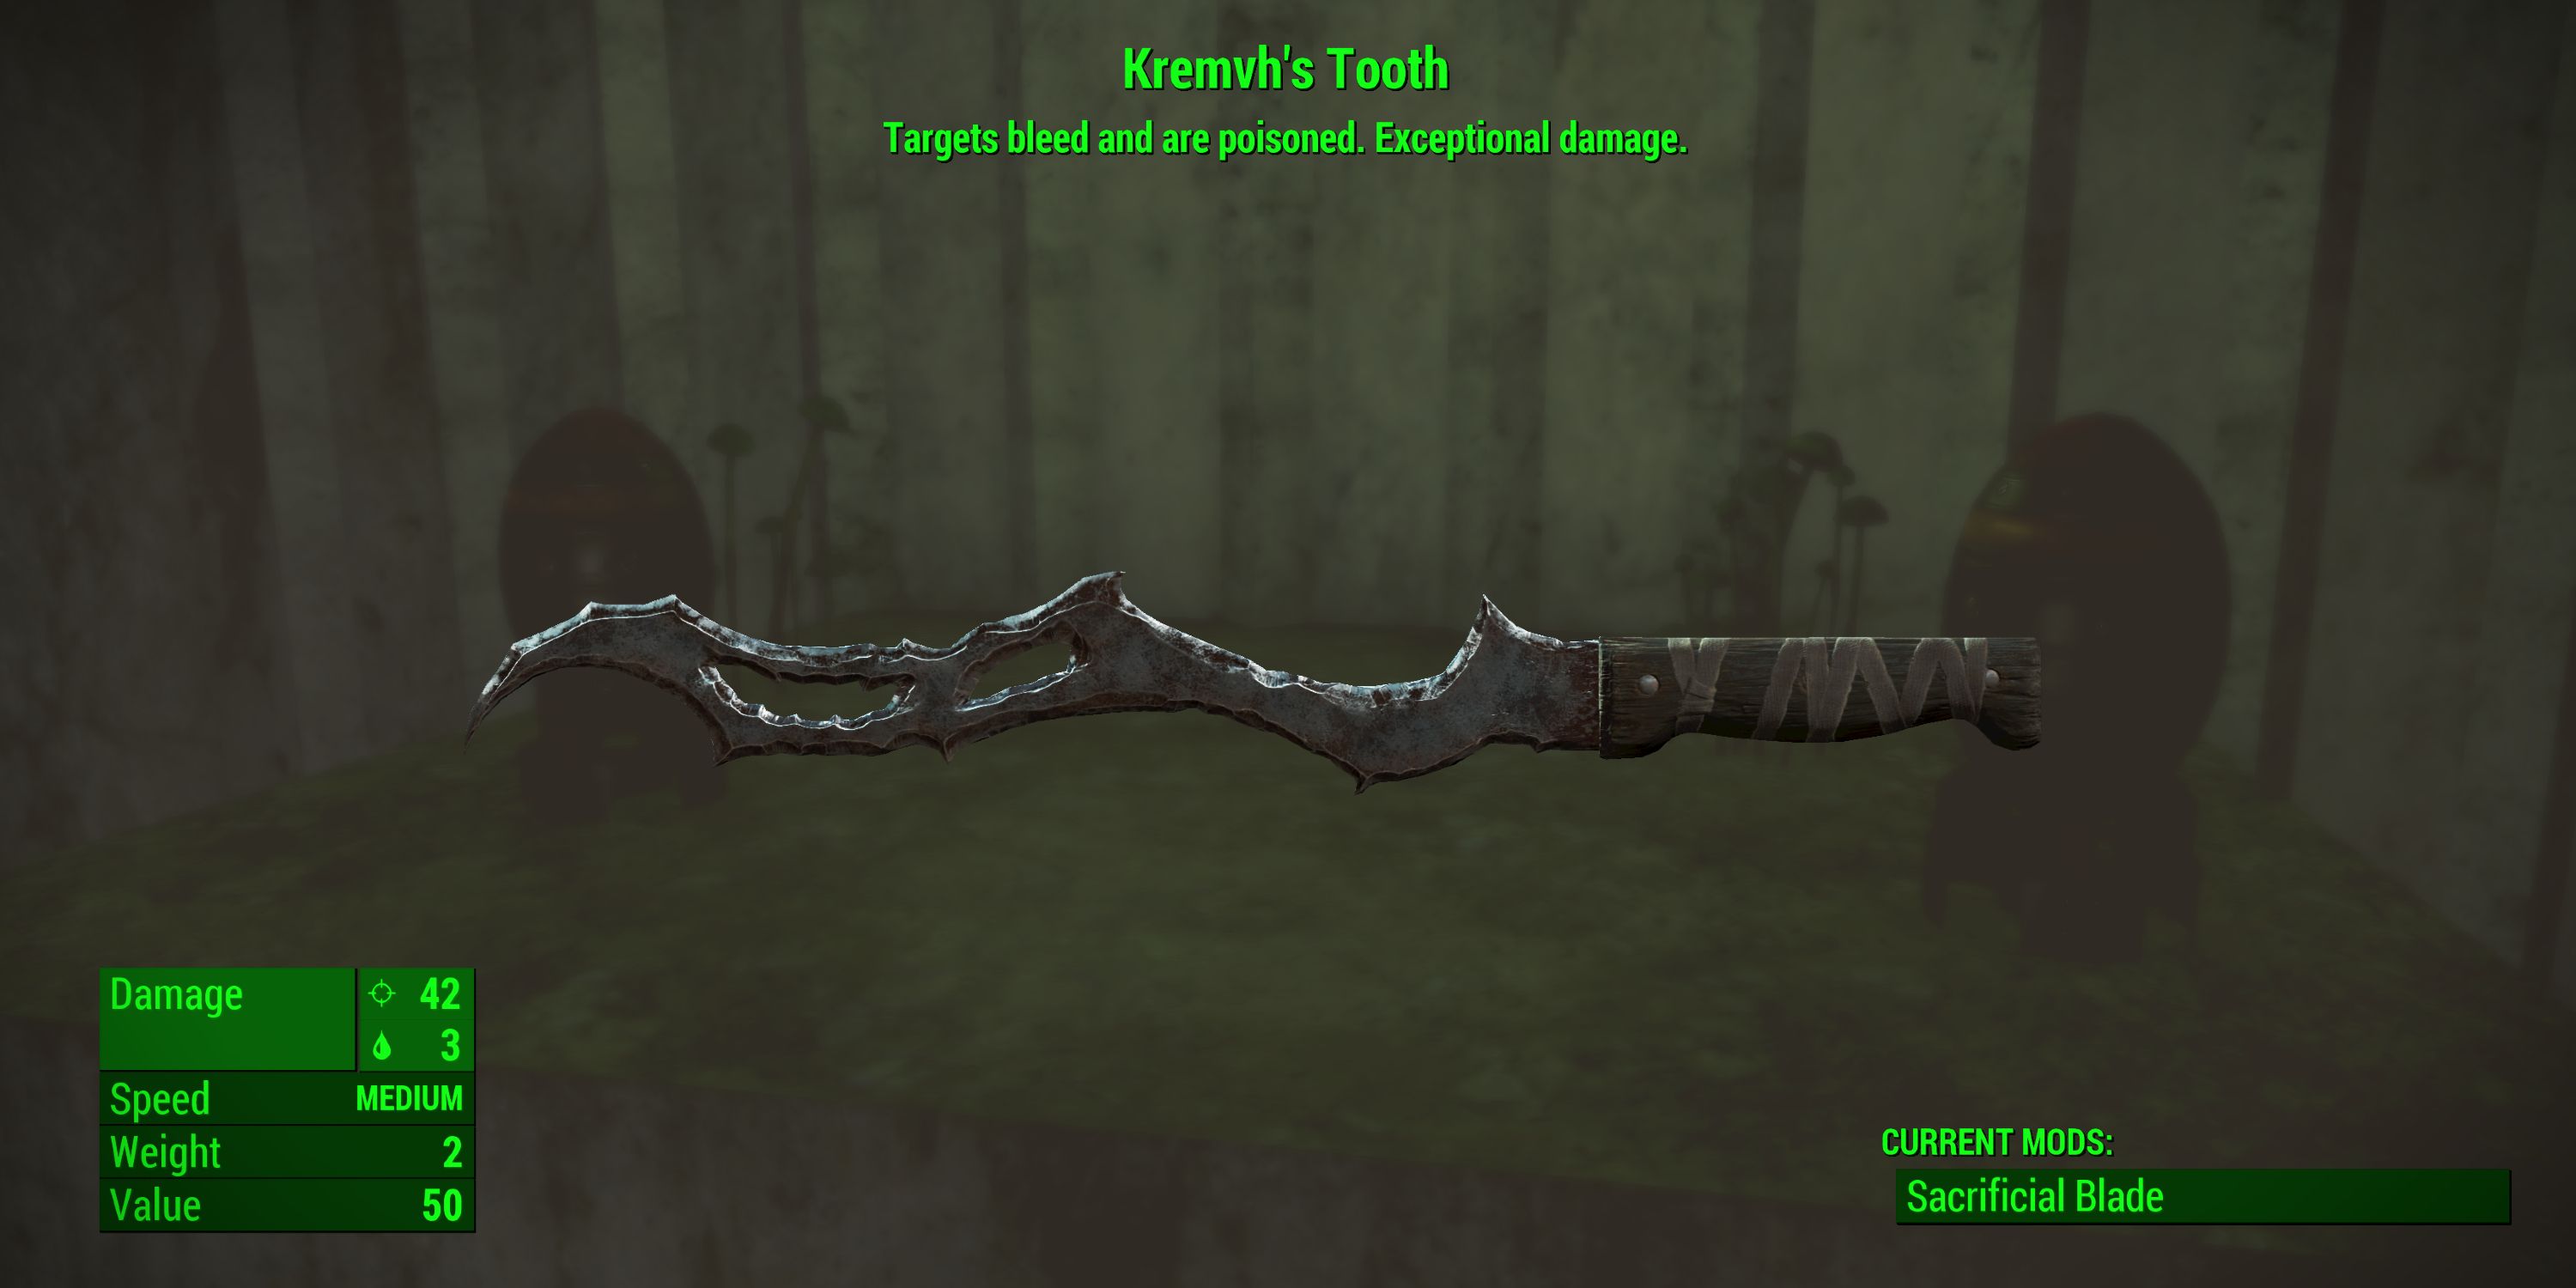 fallout-4-kremvh's-tooth-dunwich-borers-guide